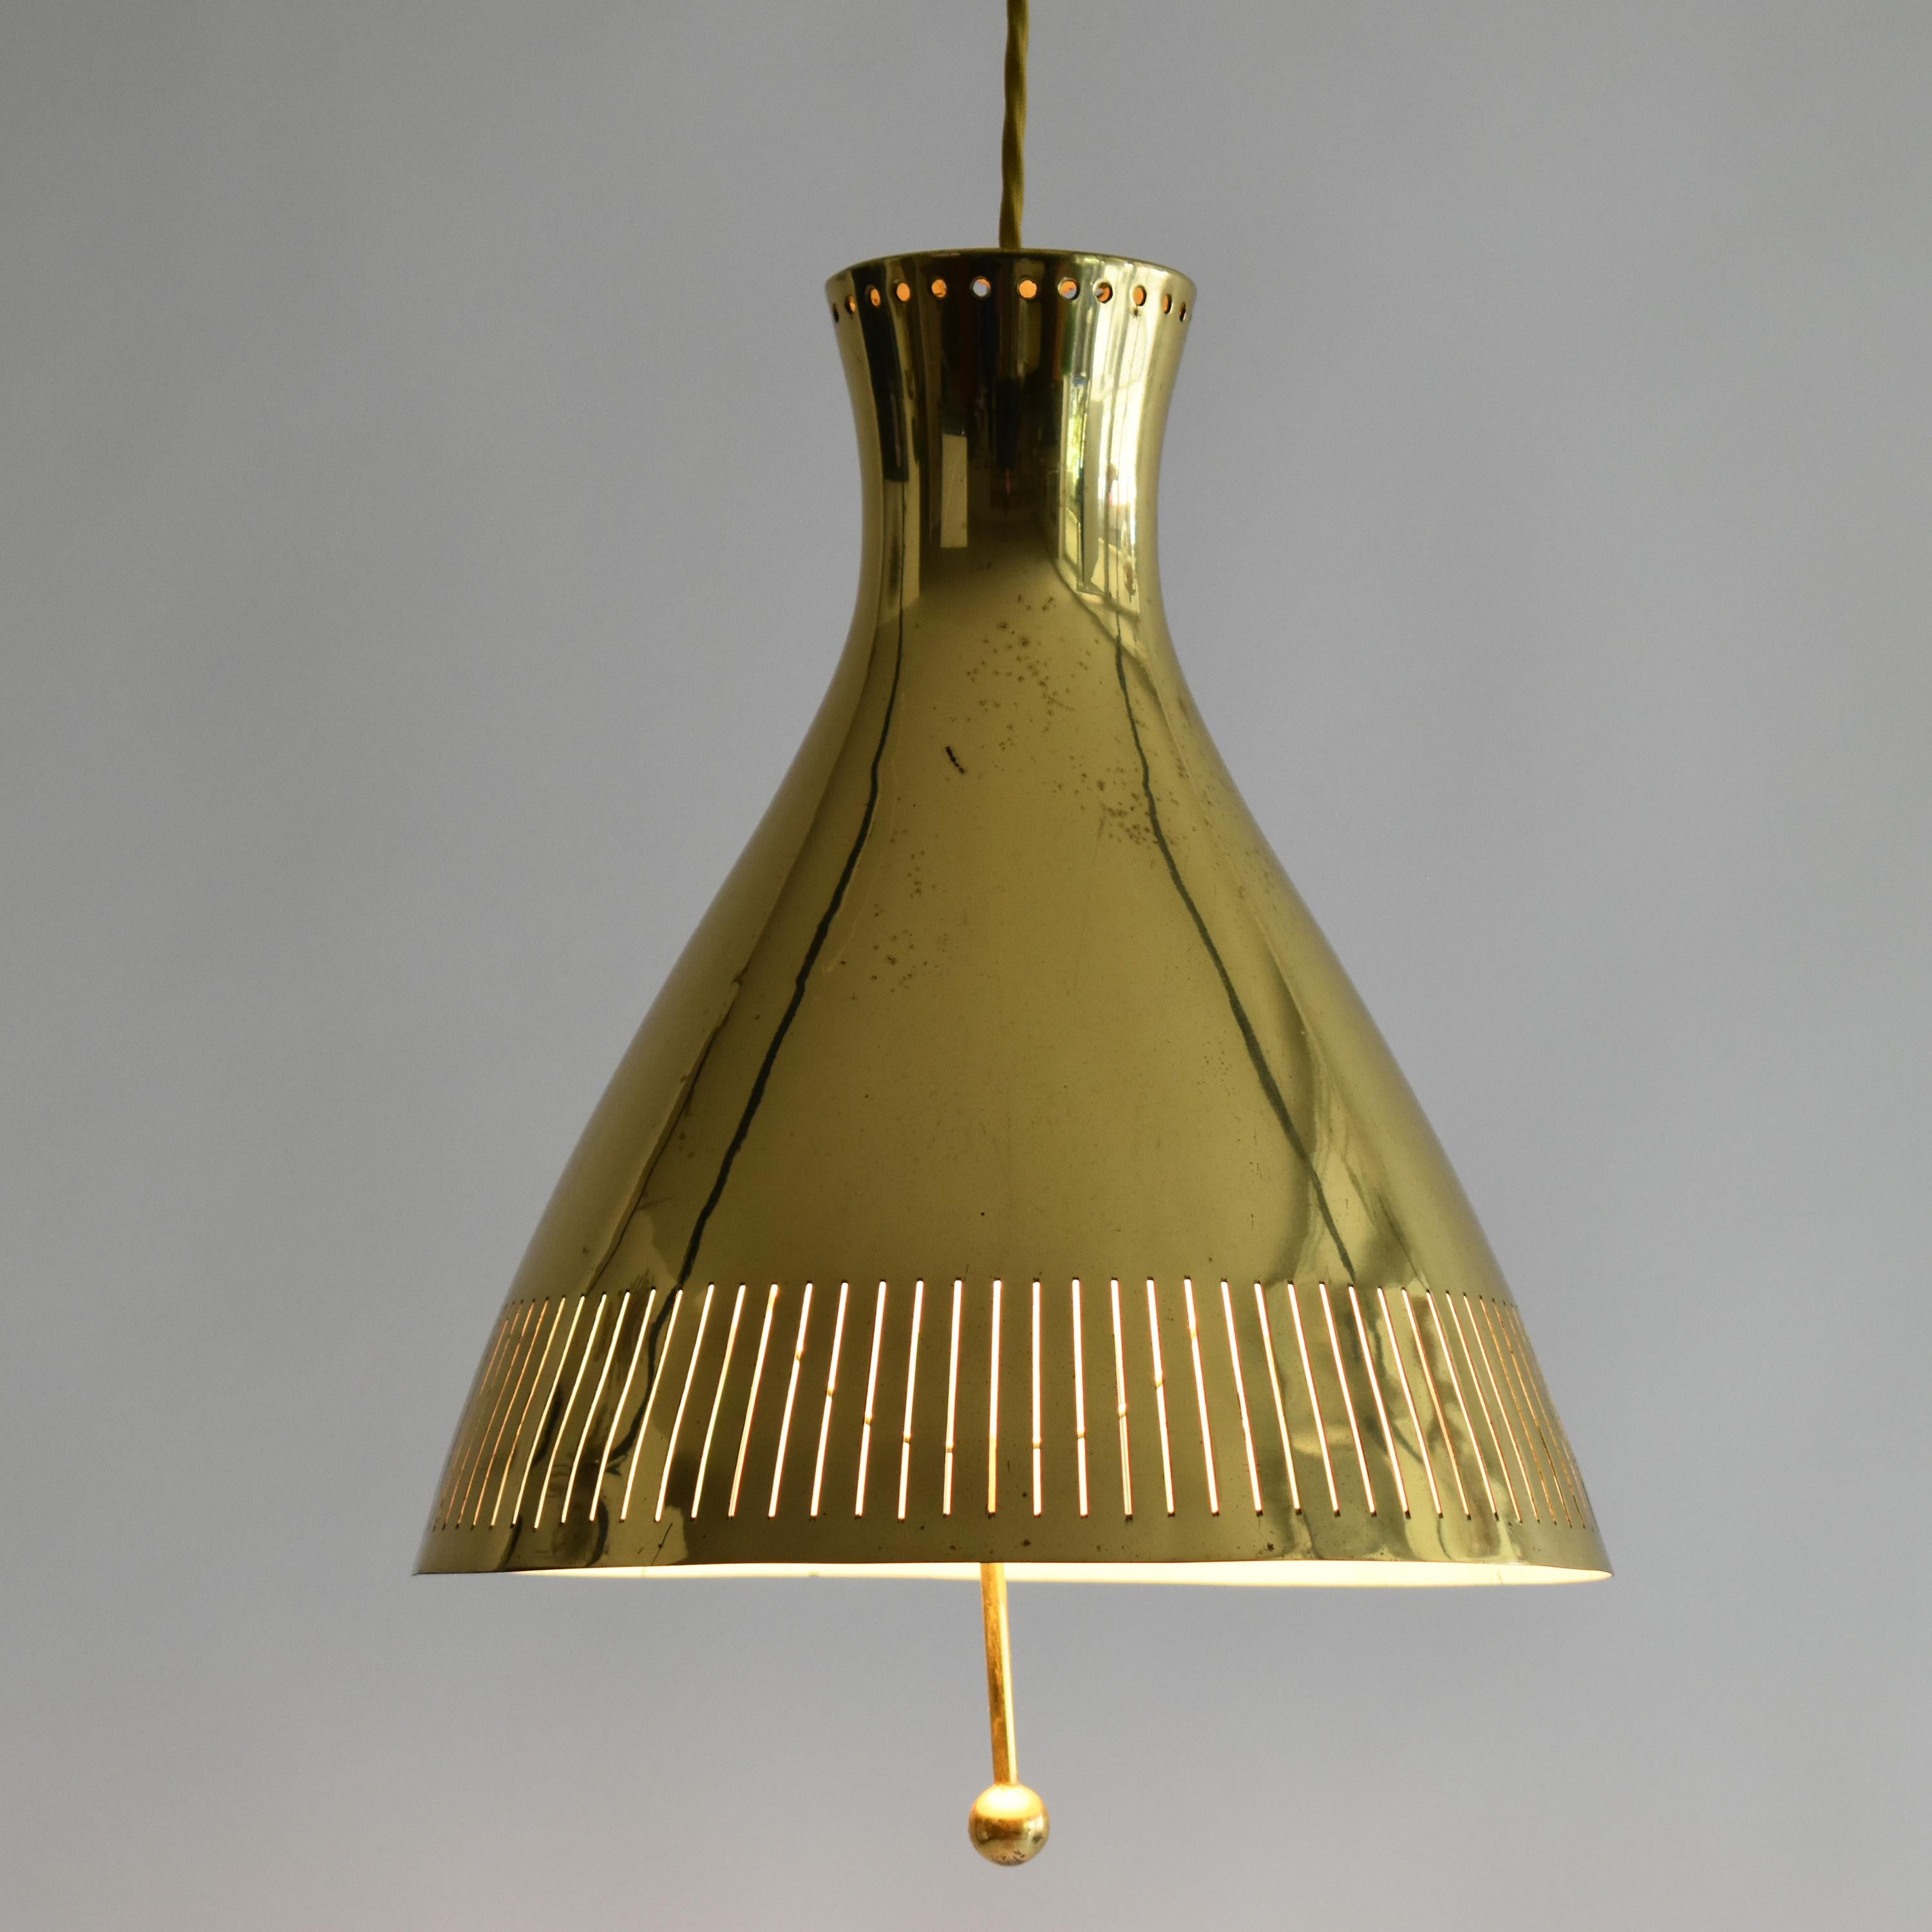 Extremely rare and elegant Mid-Century Modern brass pendant lamp or hanging light. 
Designed and manufactured by the high quality producer Vereinigte Werkstätten, in Germany.
Executed in perforated brass sheet, with a handle, it gives a nice and